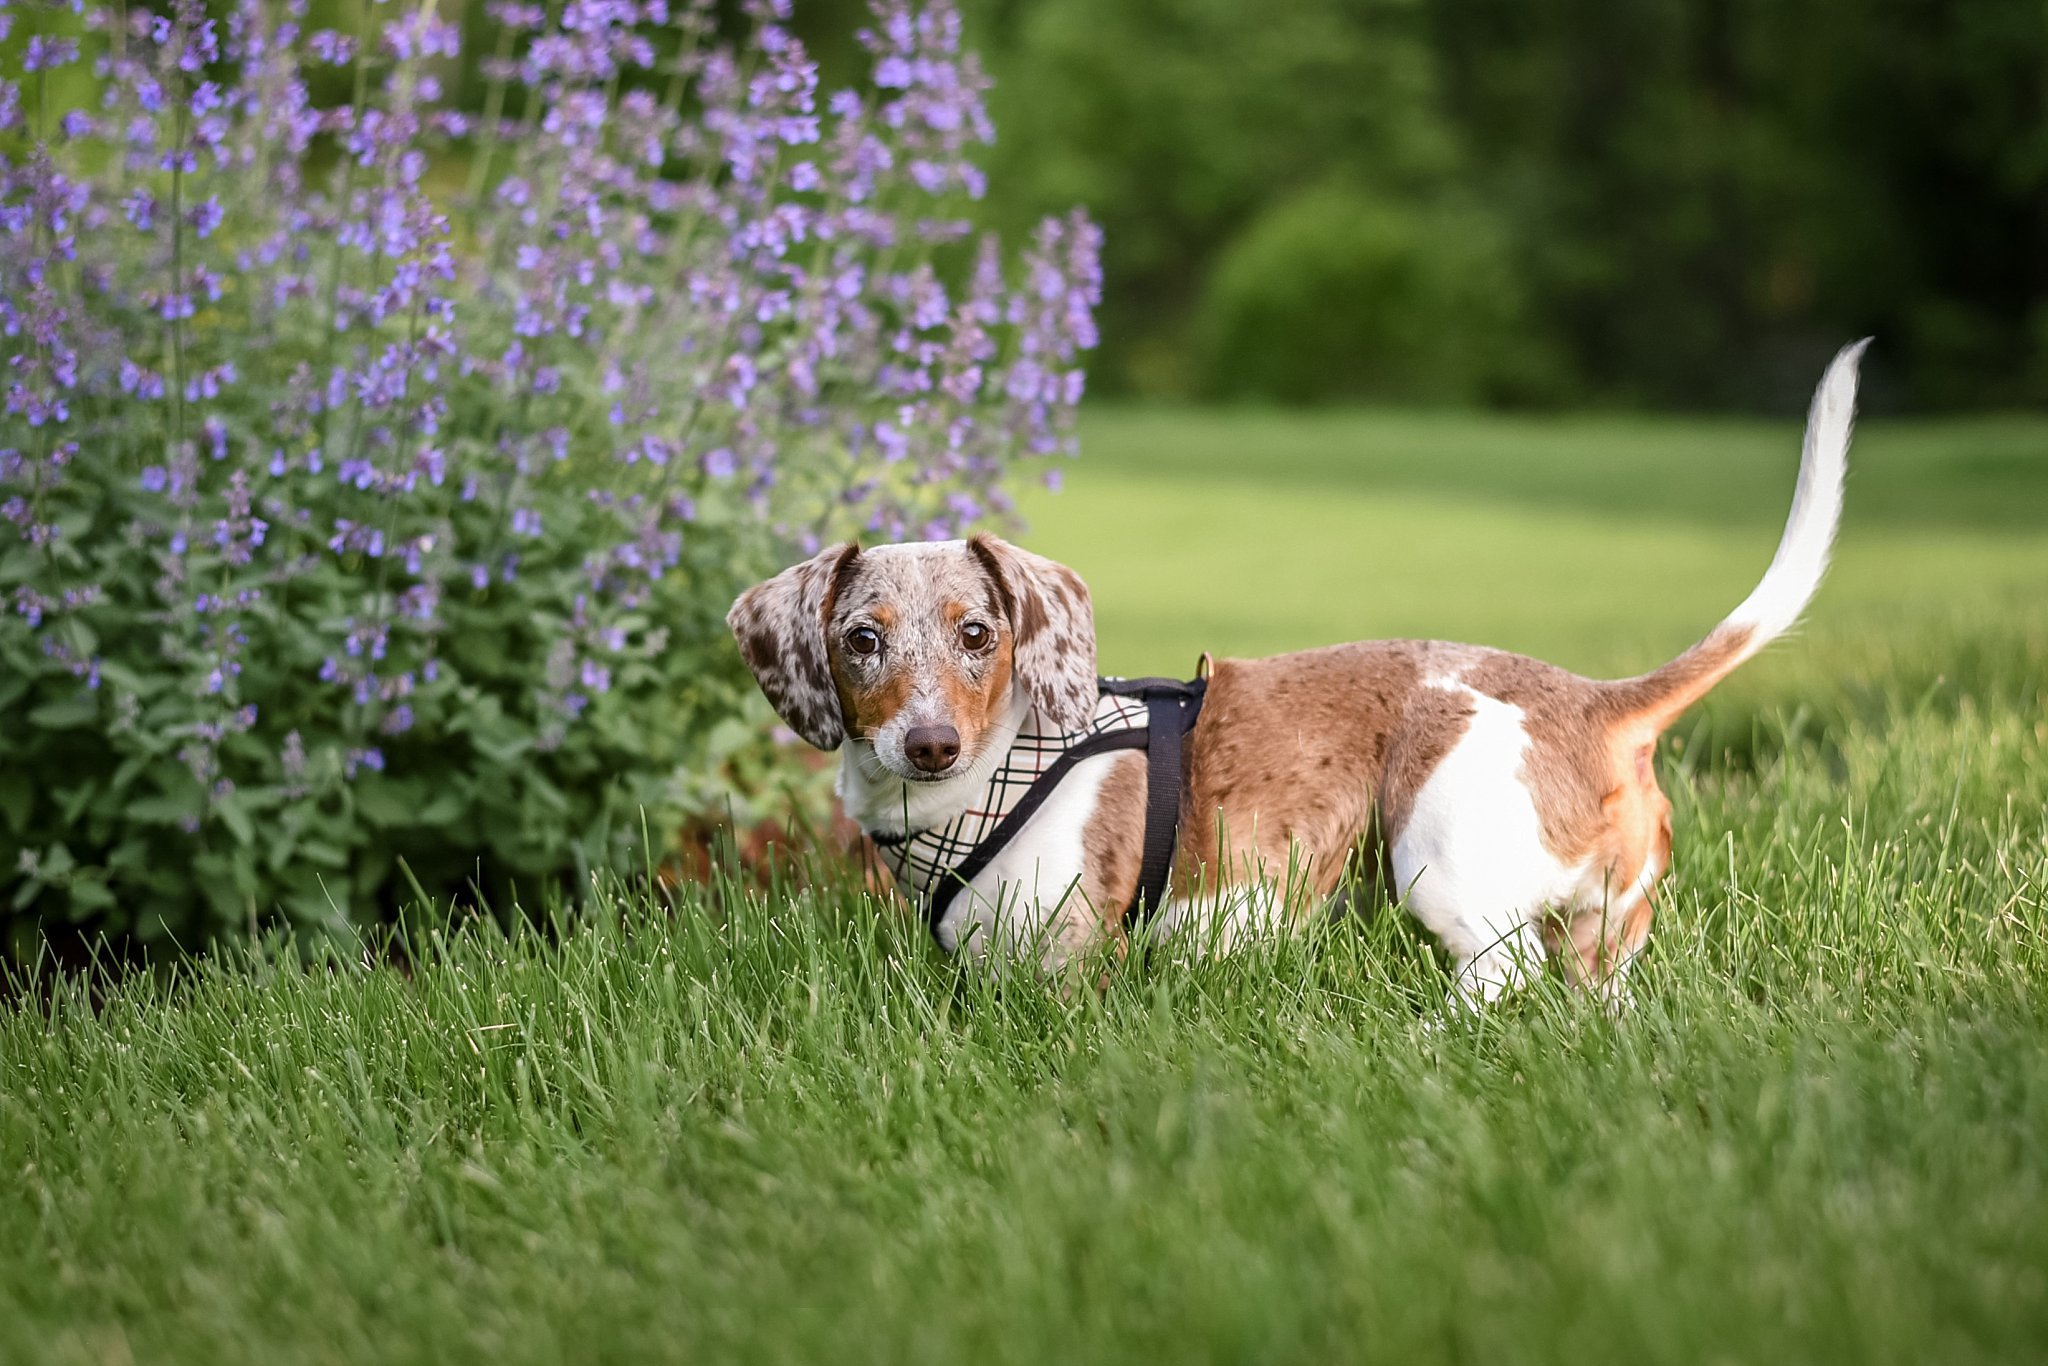 dachshund puppy in a yard with purple flowers